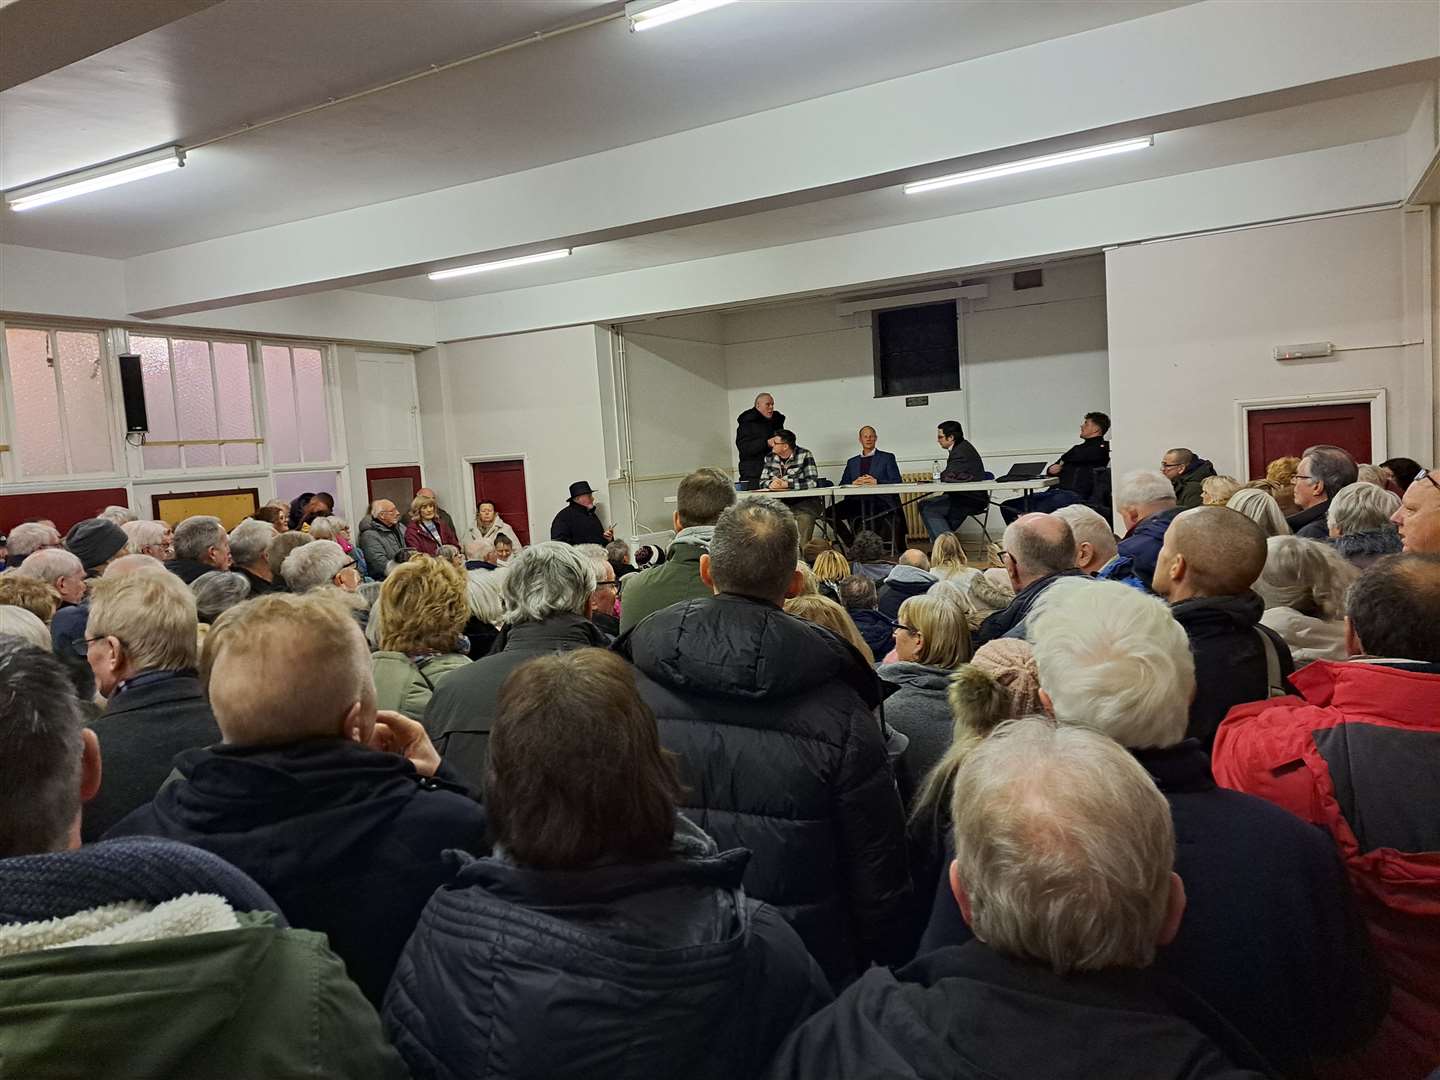 Speakers at the the United Reform Church hall meeting included David Cain, Cllr Dan Watkins and Cllr Neil Baker